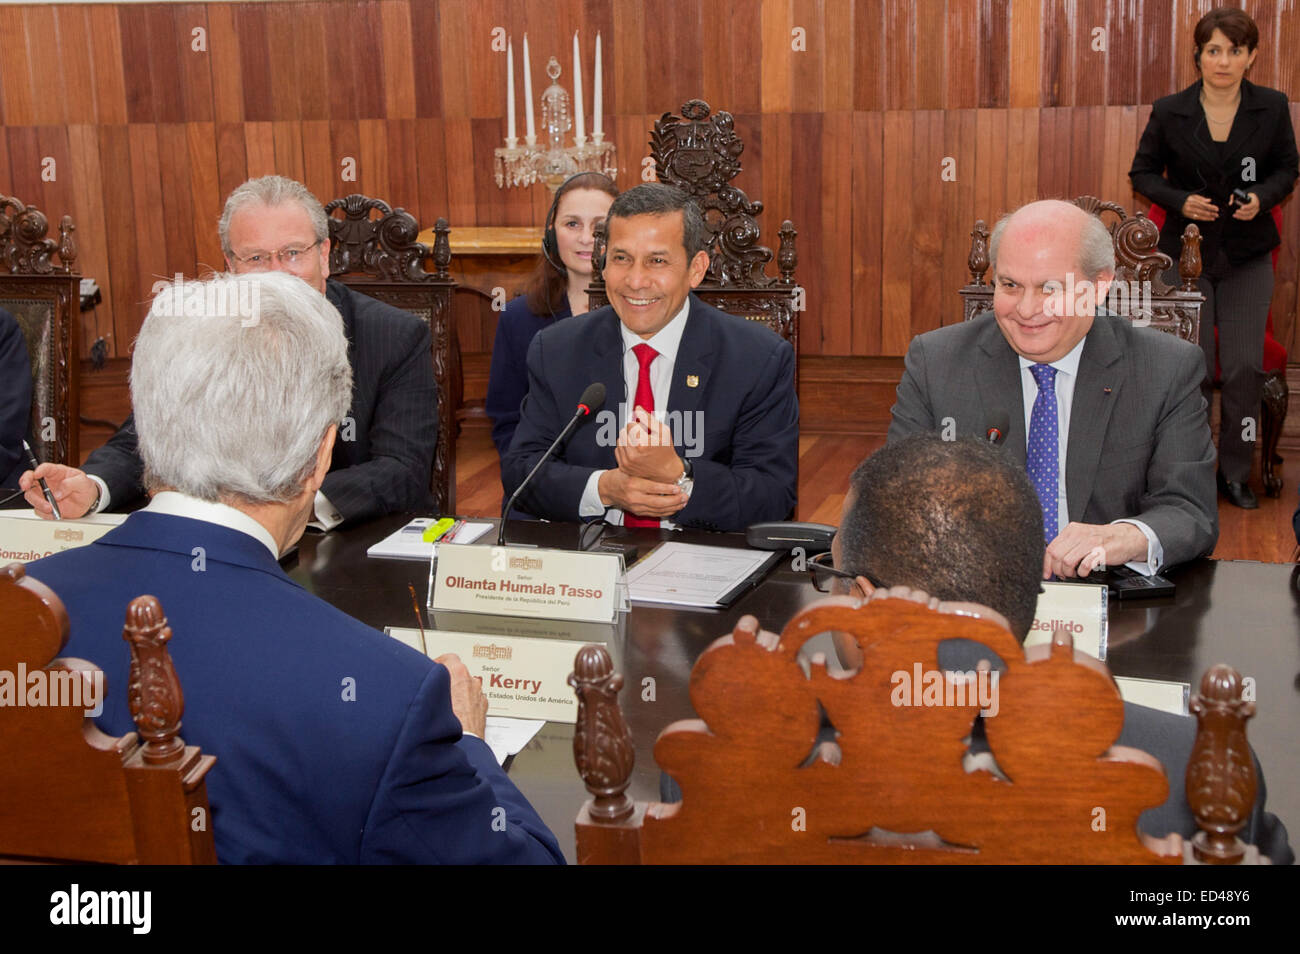 President Ollanta Humala of Peru laughs as he prepares to start a bilateral meeting with U.S. Secretary of State John Kerry in Lima, Peru, on Dec. 11, 2014, and after the Secretary addressed the 20th session of the Conference of the Parties to the United Nations Framework Convention on Climate Change. Stock Photo